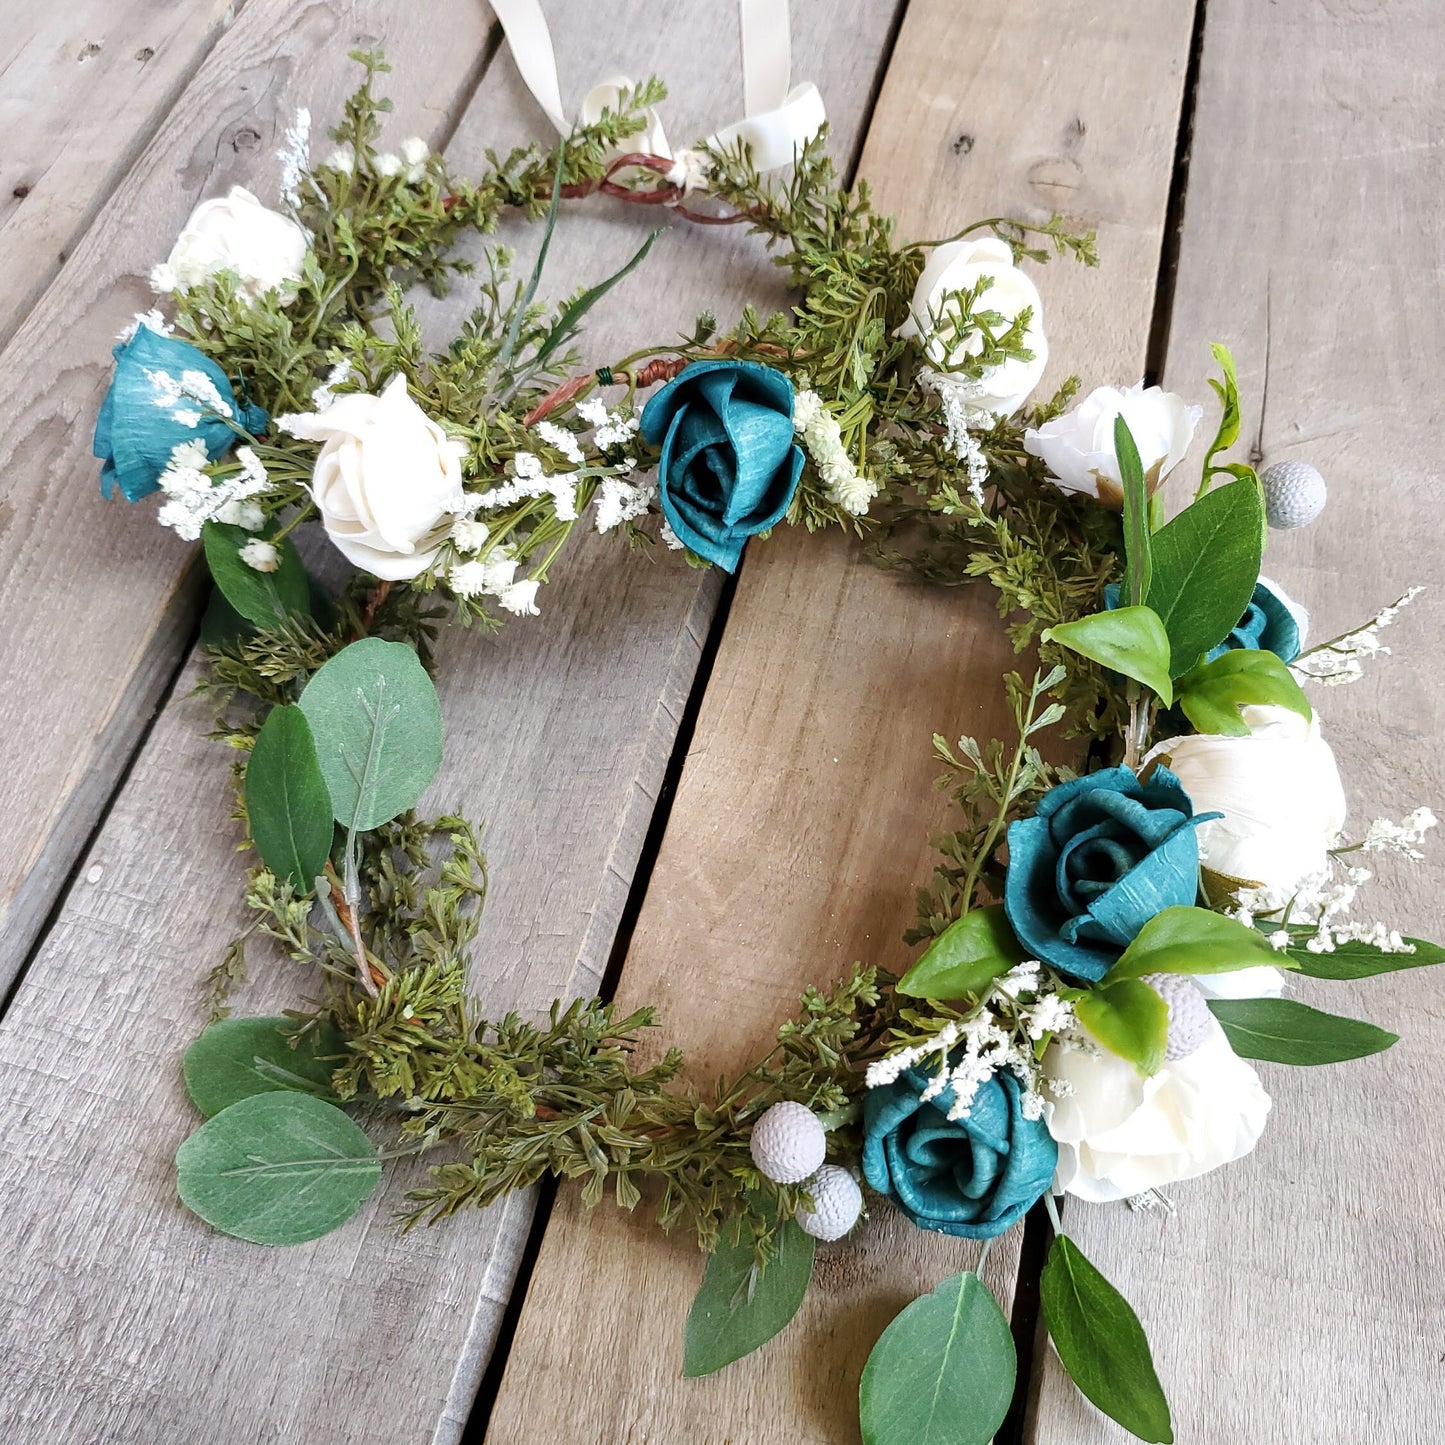 Bridal Flower Crown with Sola Wood Flowers, Floral Wreath for Hair, Flower Girl Tiara